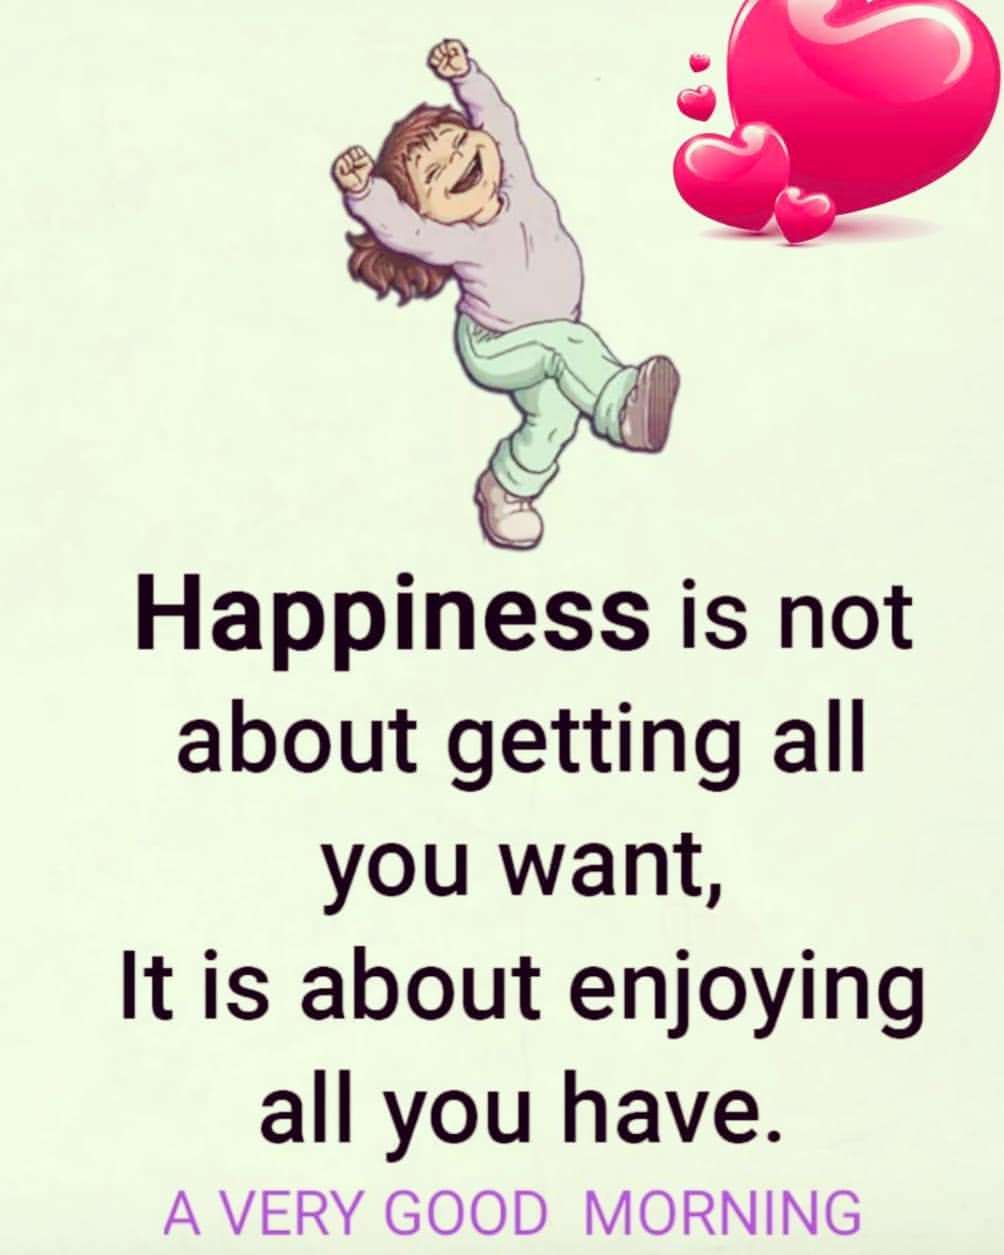 Happiness is not about getting all you want, it is about enjoying all you have. A very good morning.